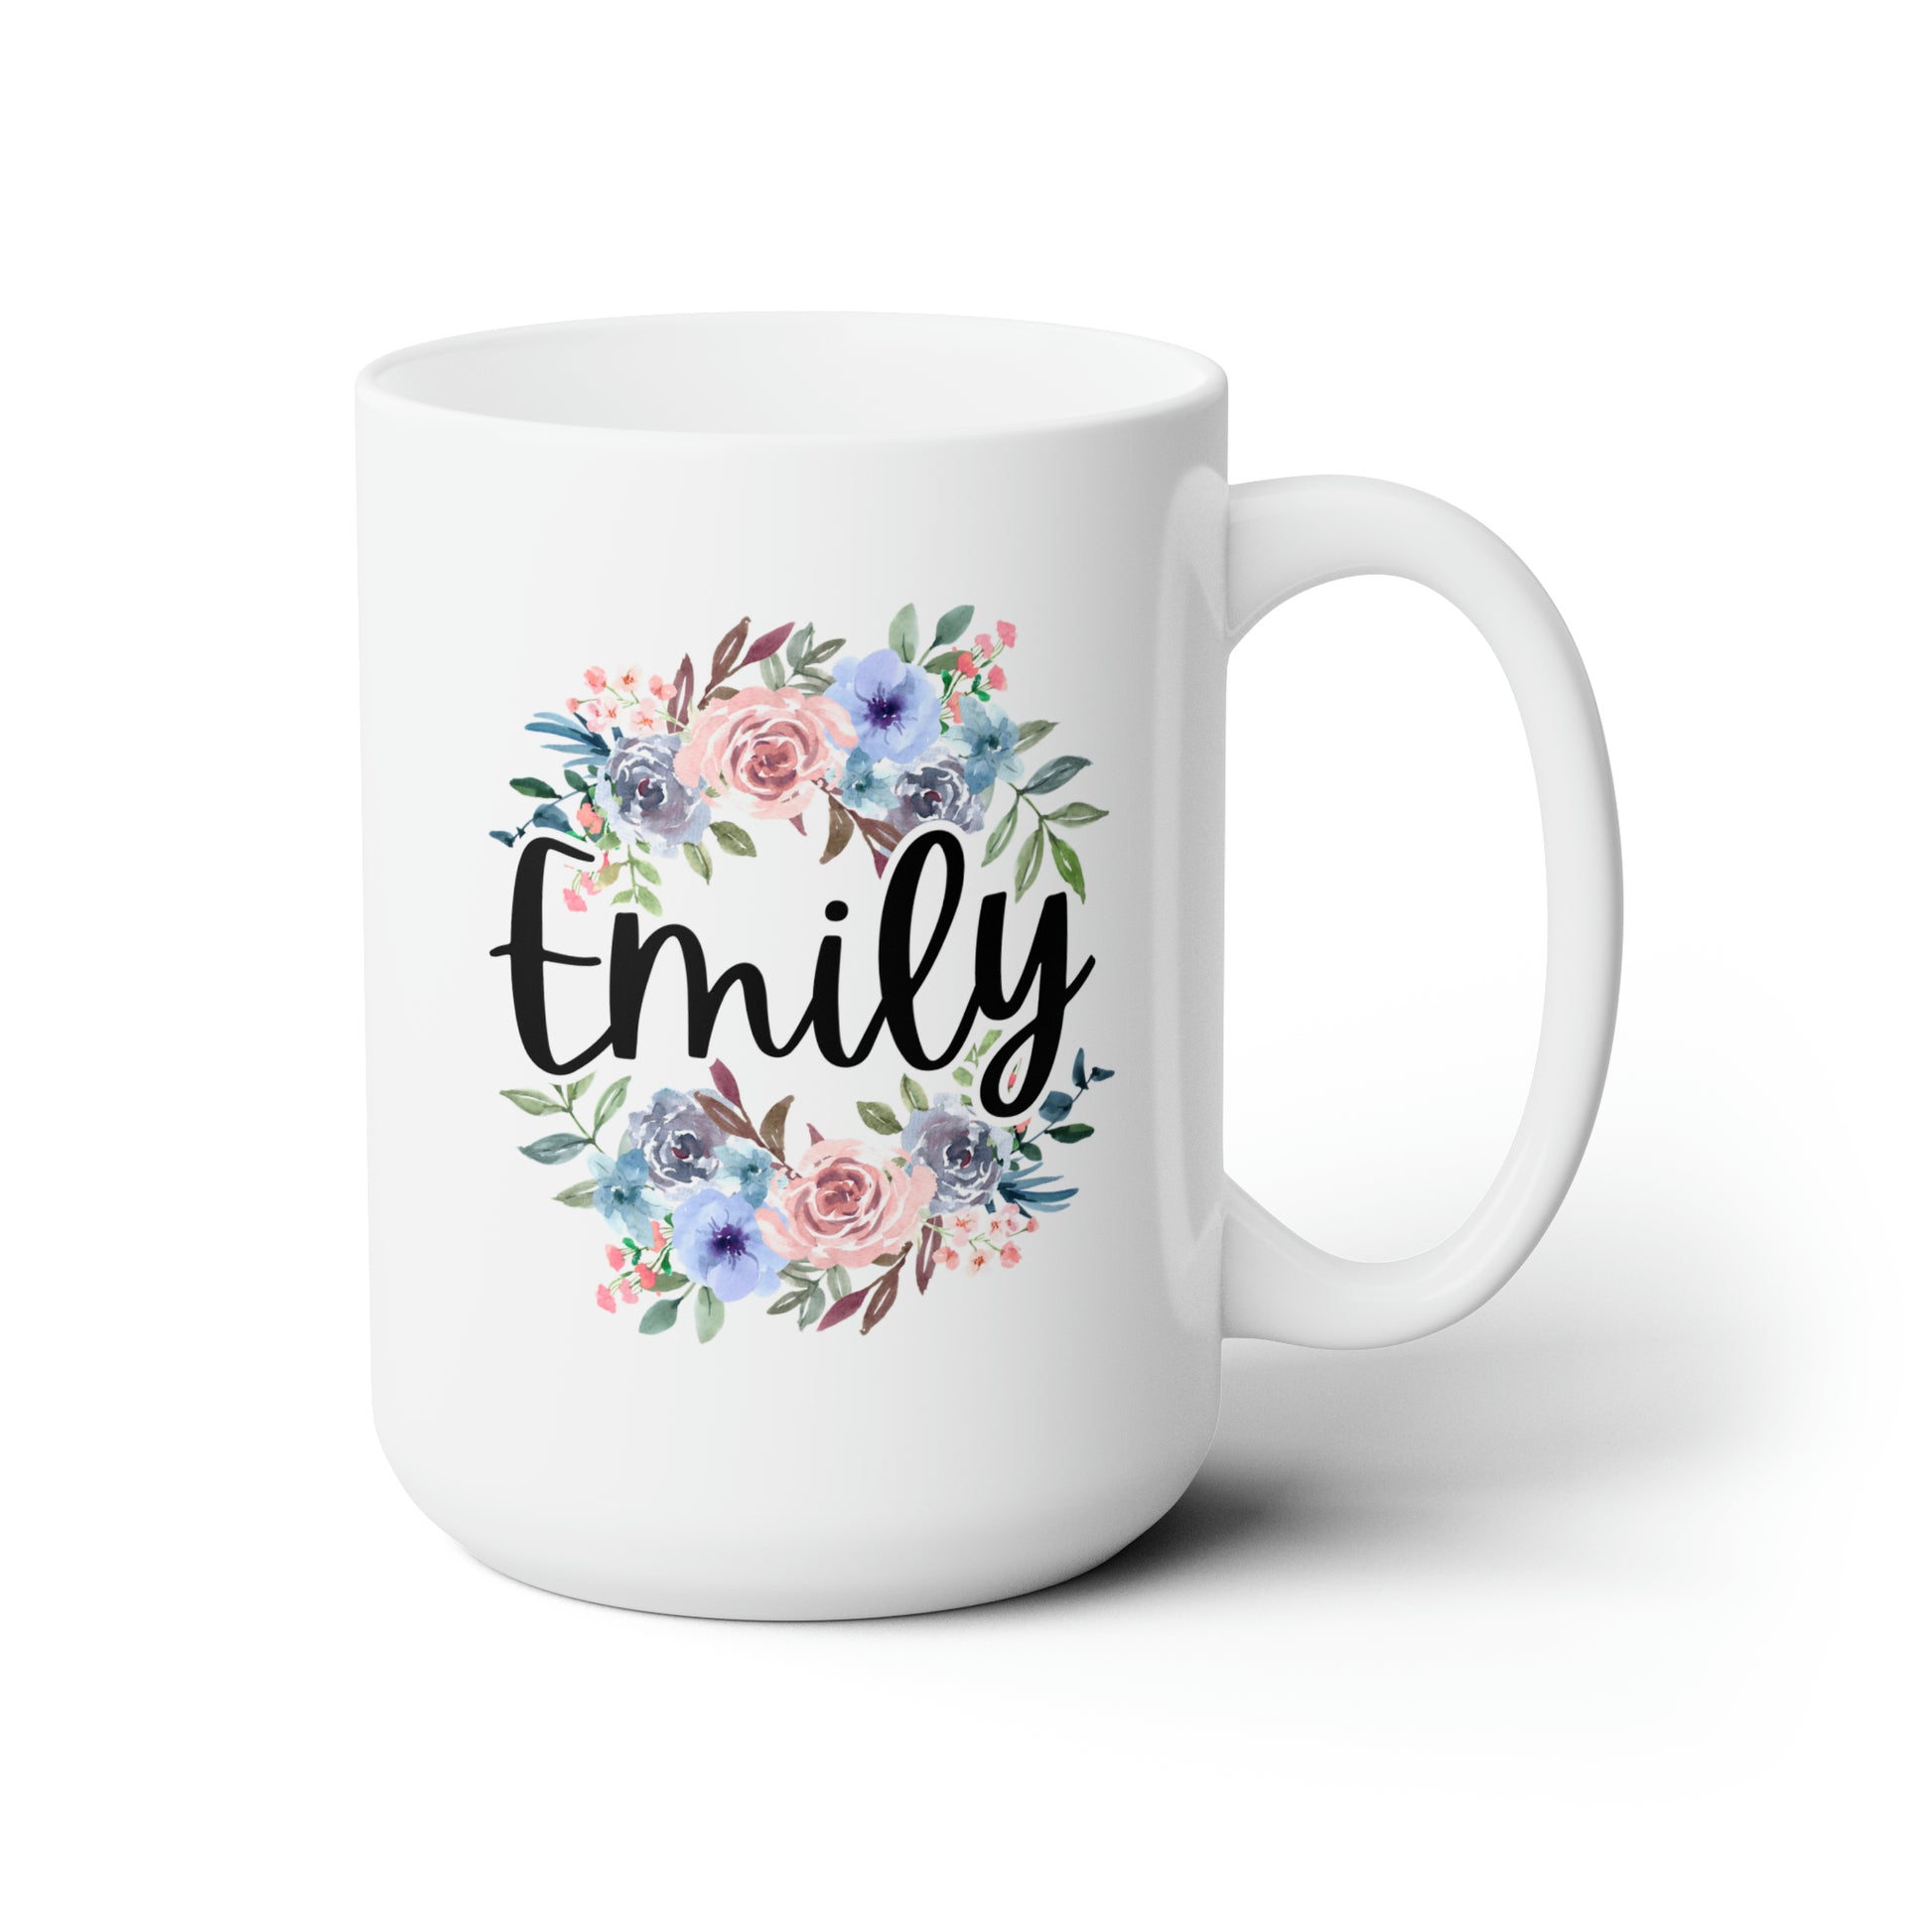 Flowers Name 15oz white funny large coffee mug gift for her floral bridesmaid christmas mothers day custom customized personalized waveywares wavey wares wavywares wavy wares